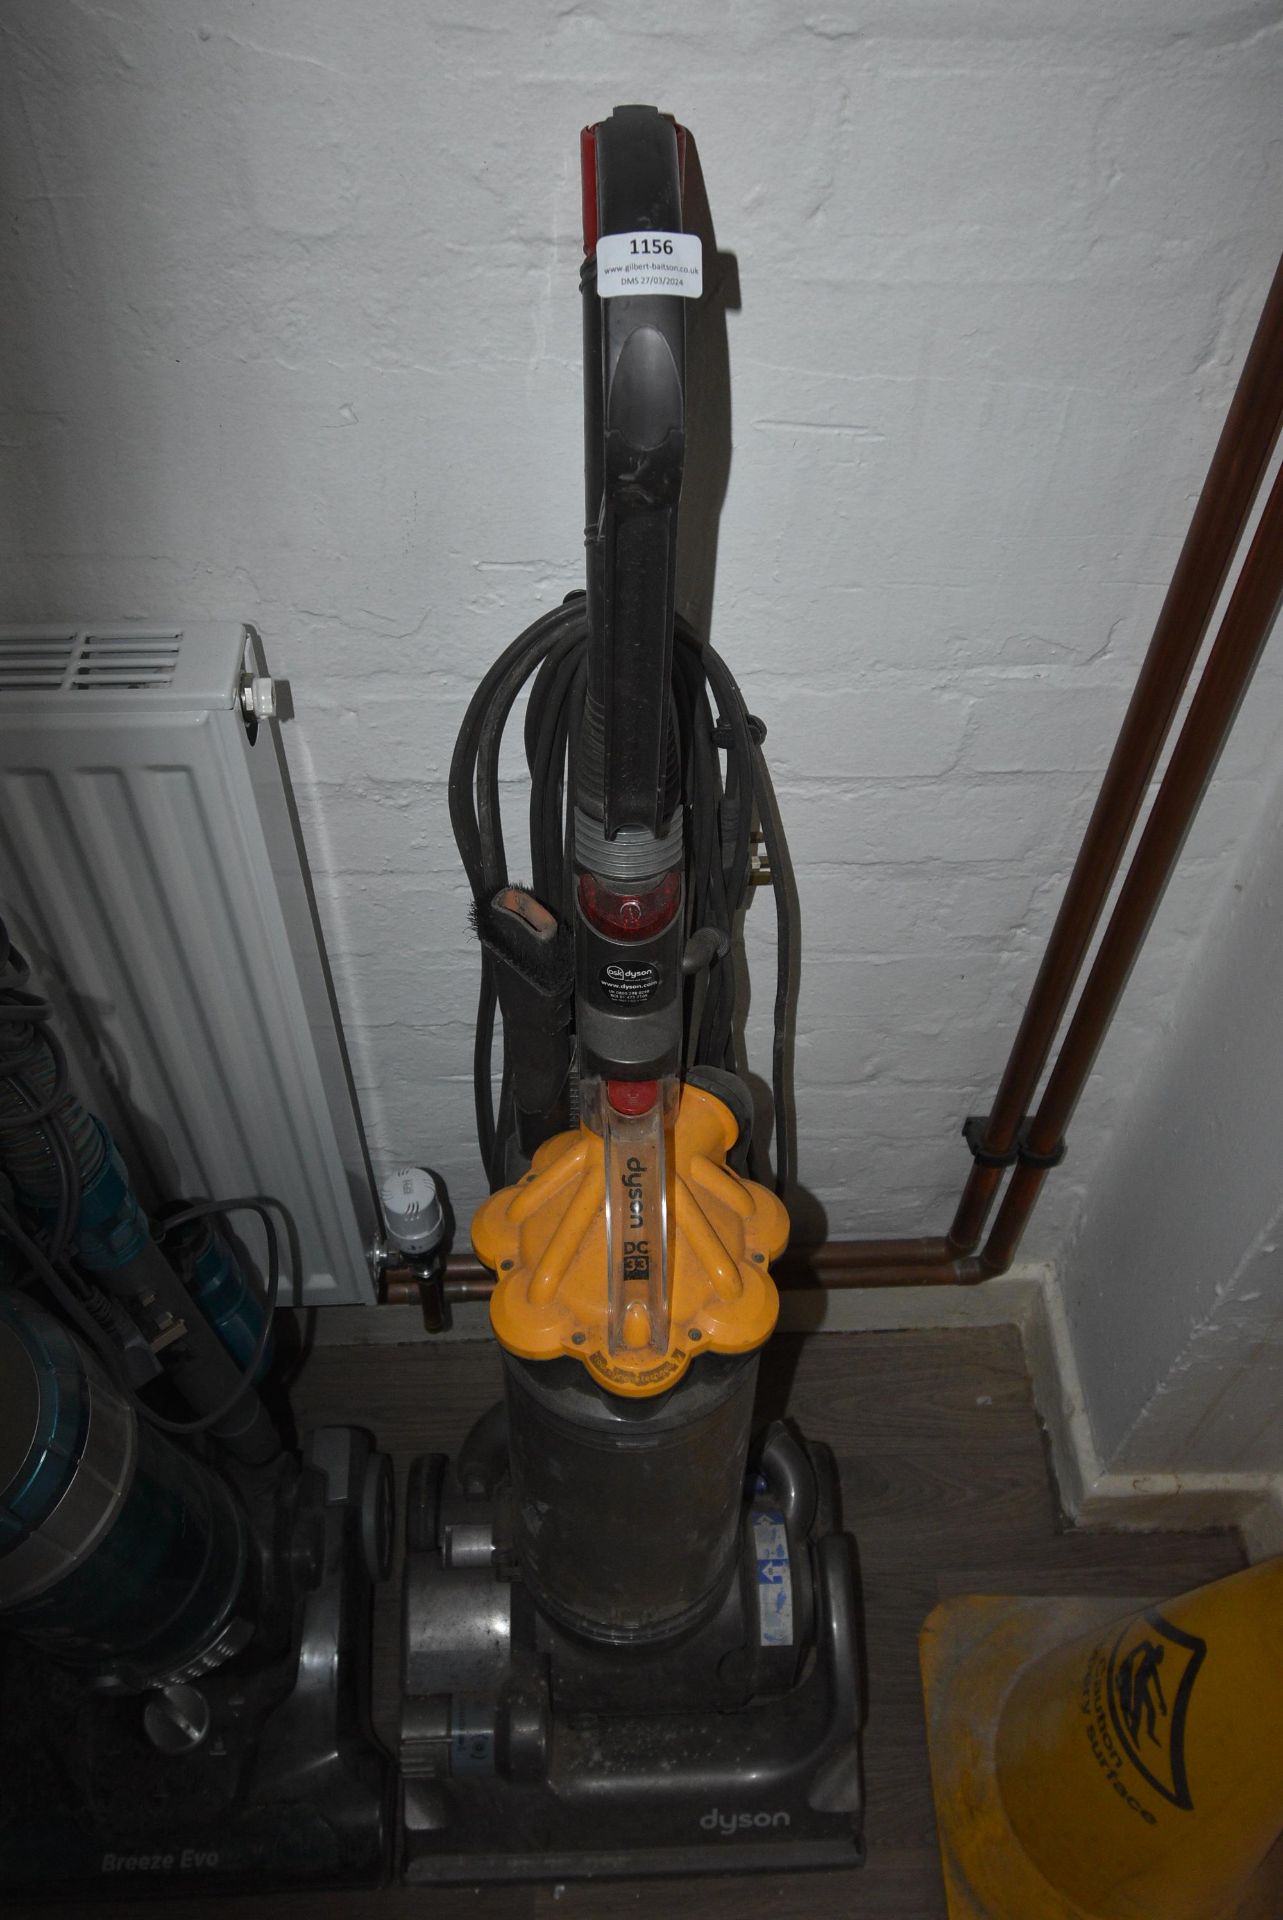 *Dyson DC33 Upright Vacuum Cleaner (Location: 64 King Edward St, Grimsby, DN31 3JP, Viewing